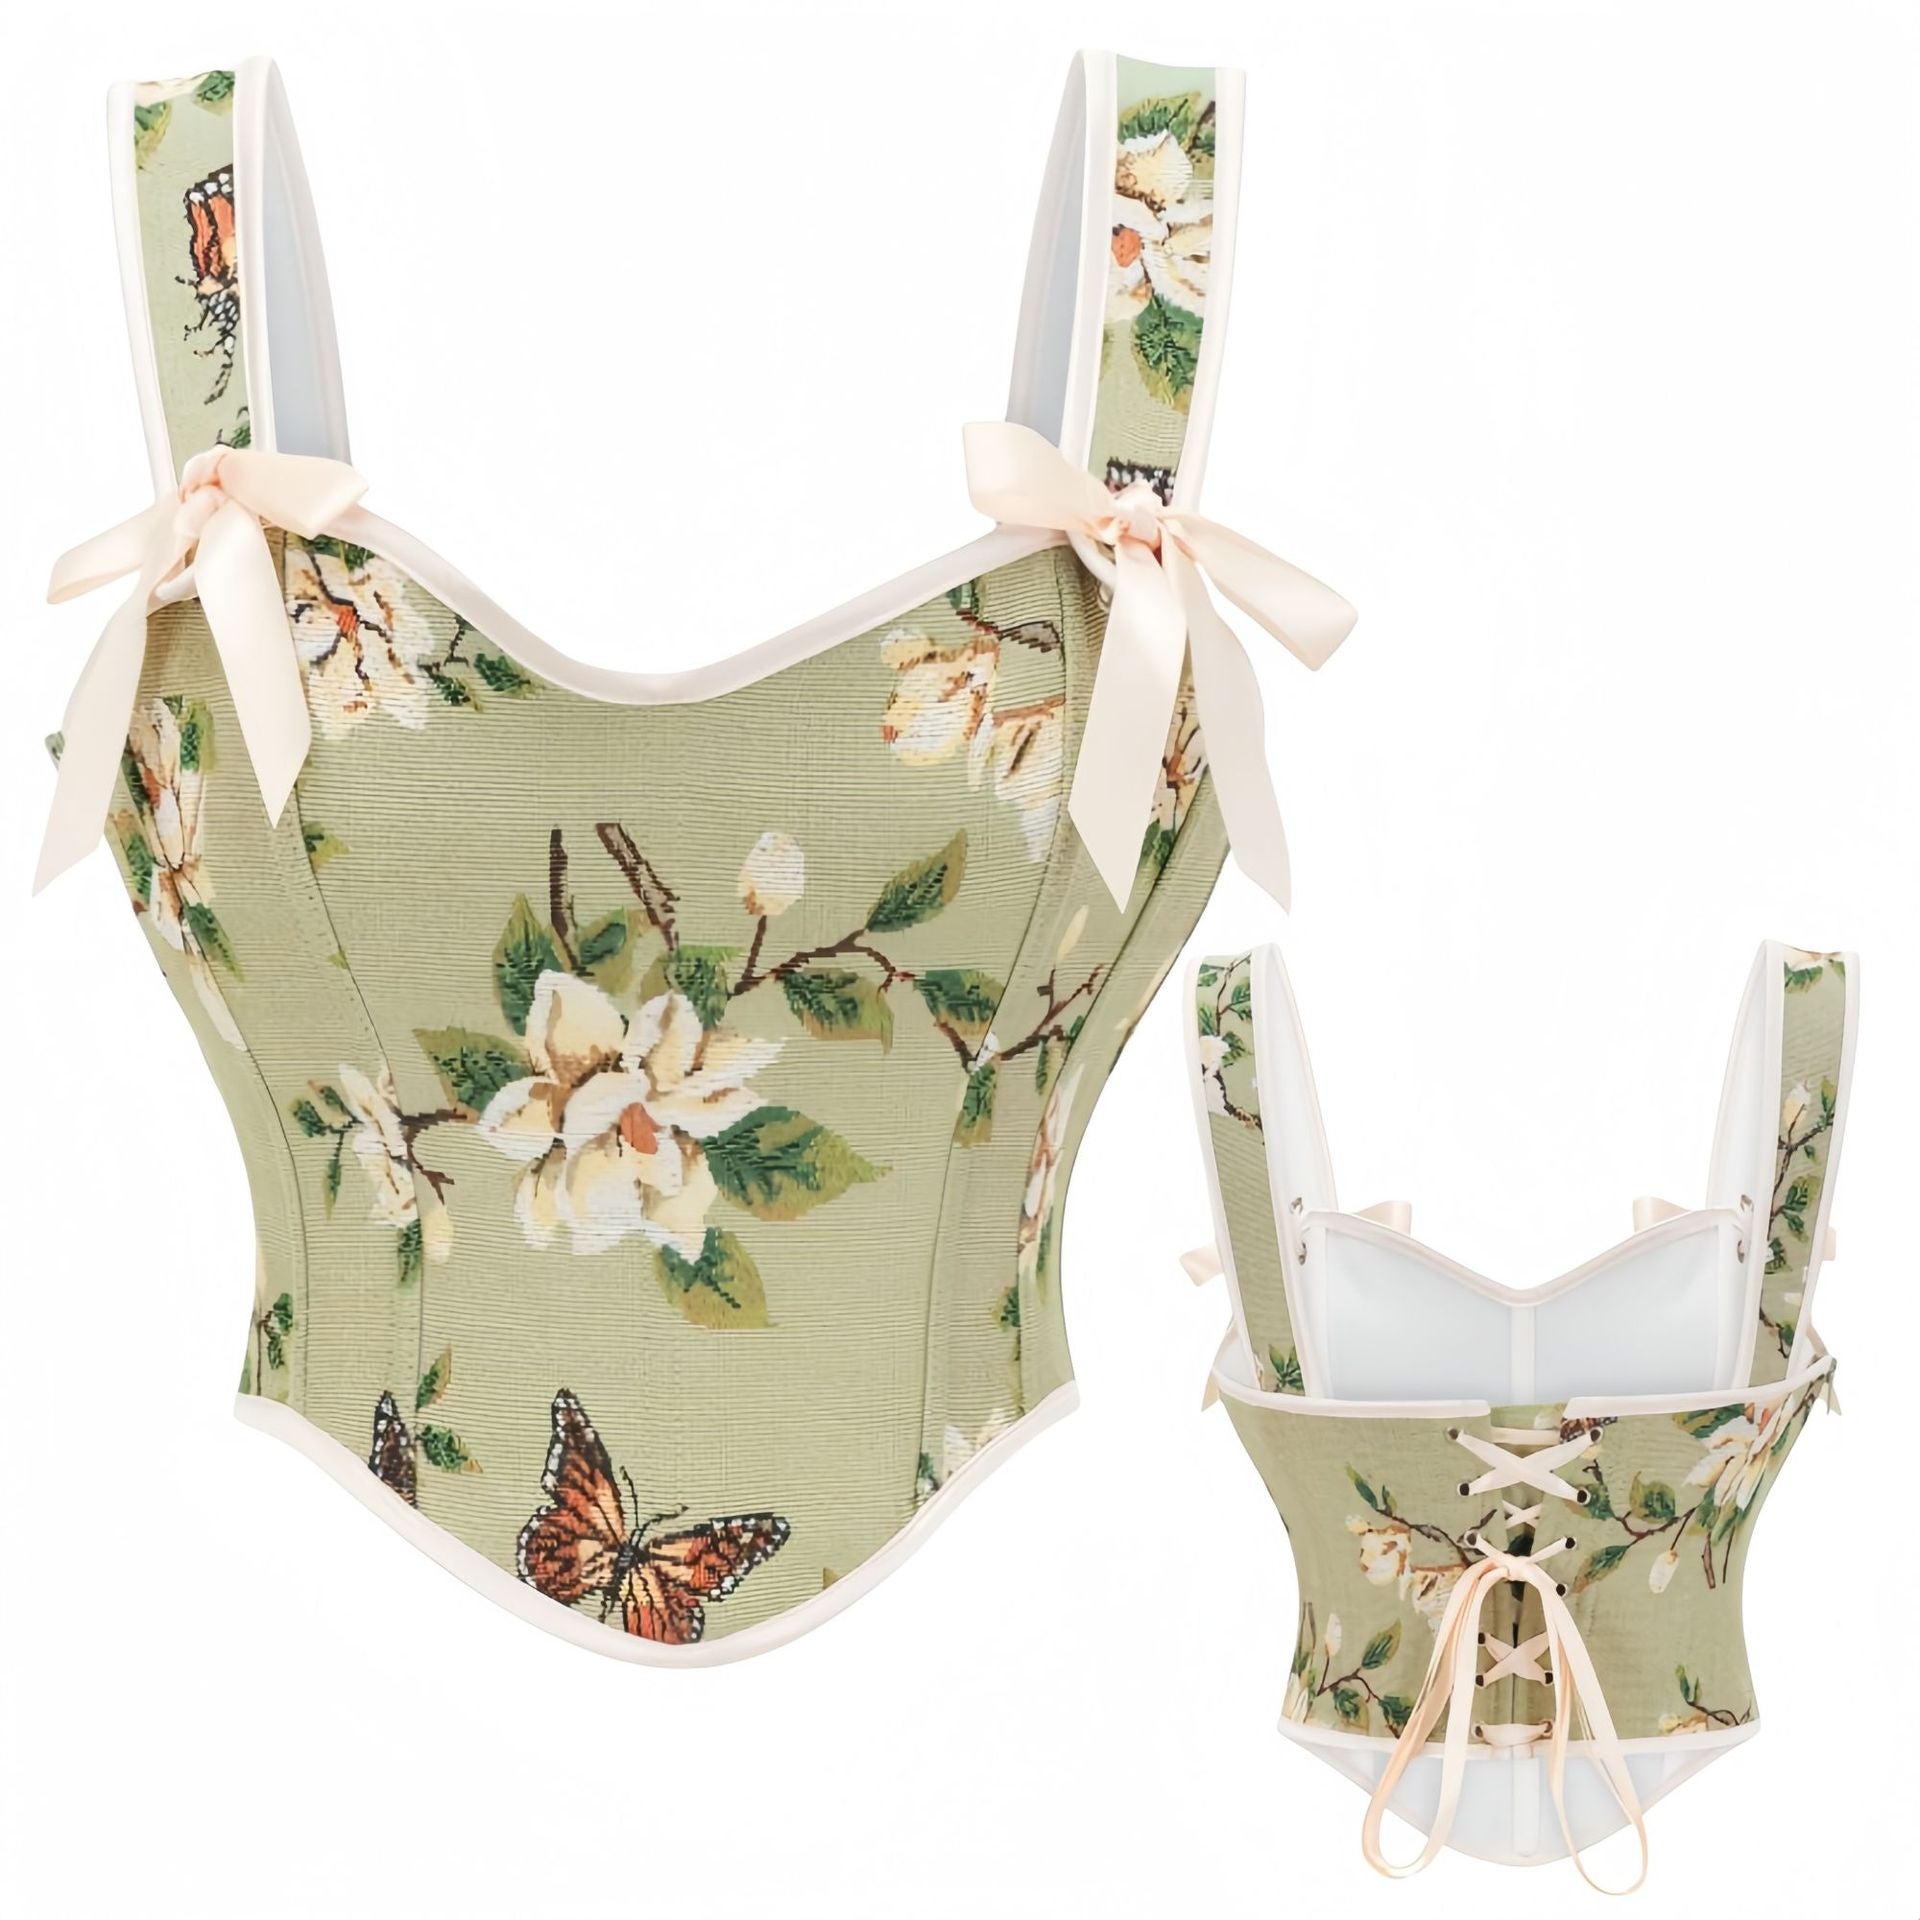 Women's Bowknot Sexy Floral Print Lingerie Costumes